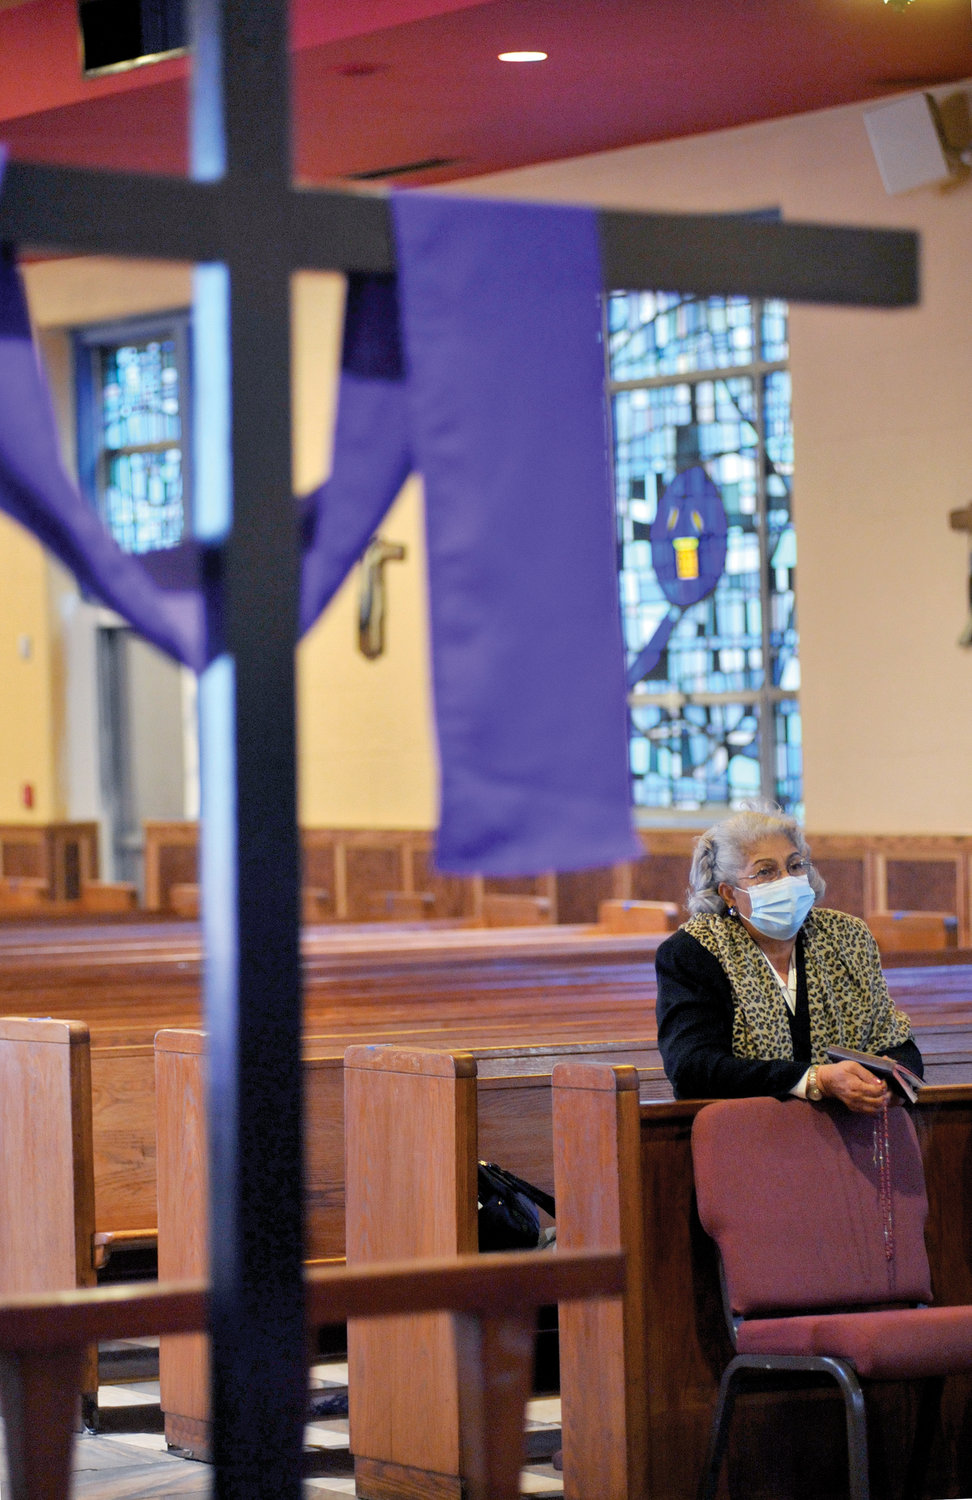 A purple cloth drapes a cross in the front of the church for the Lenten season.